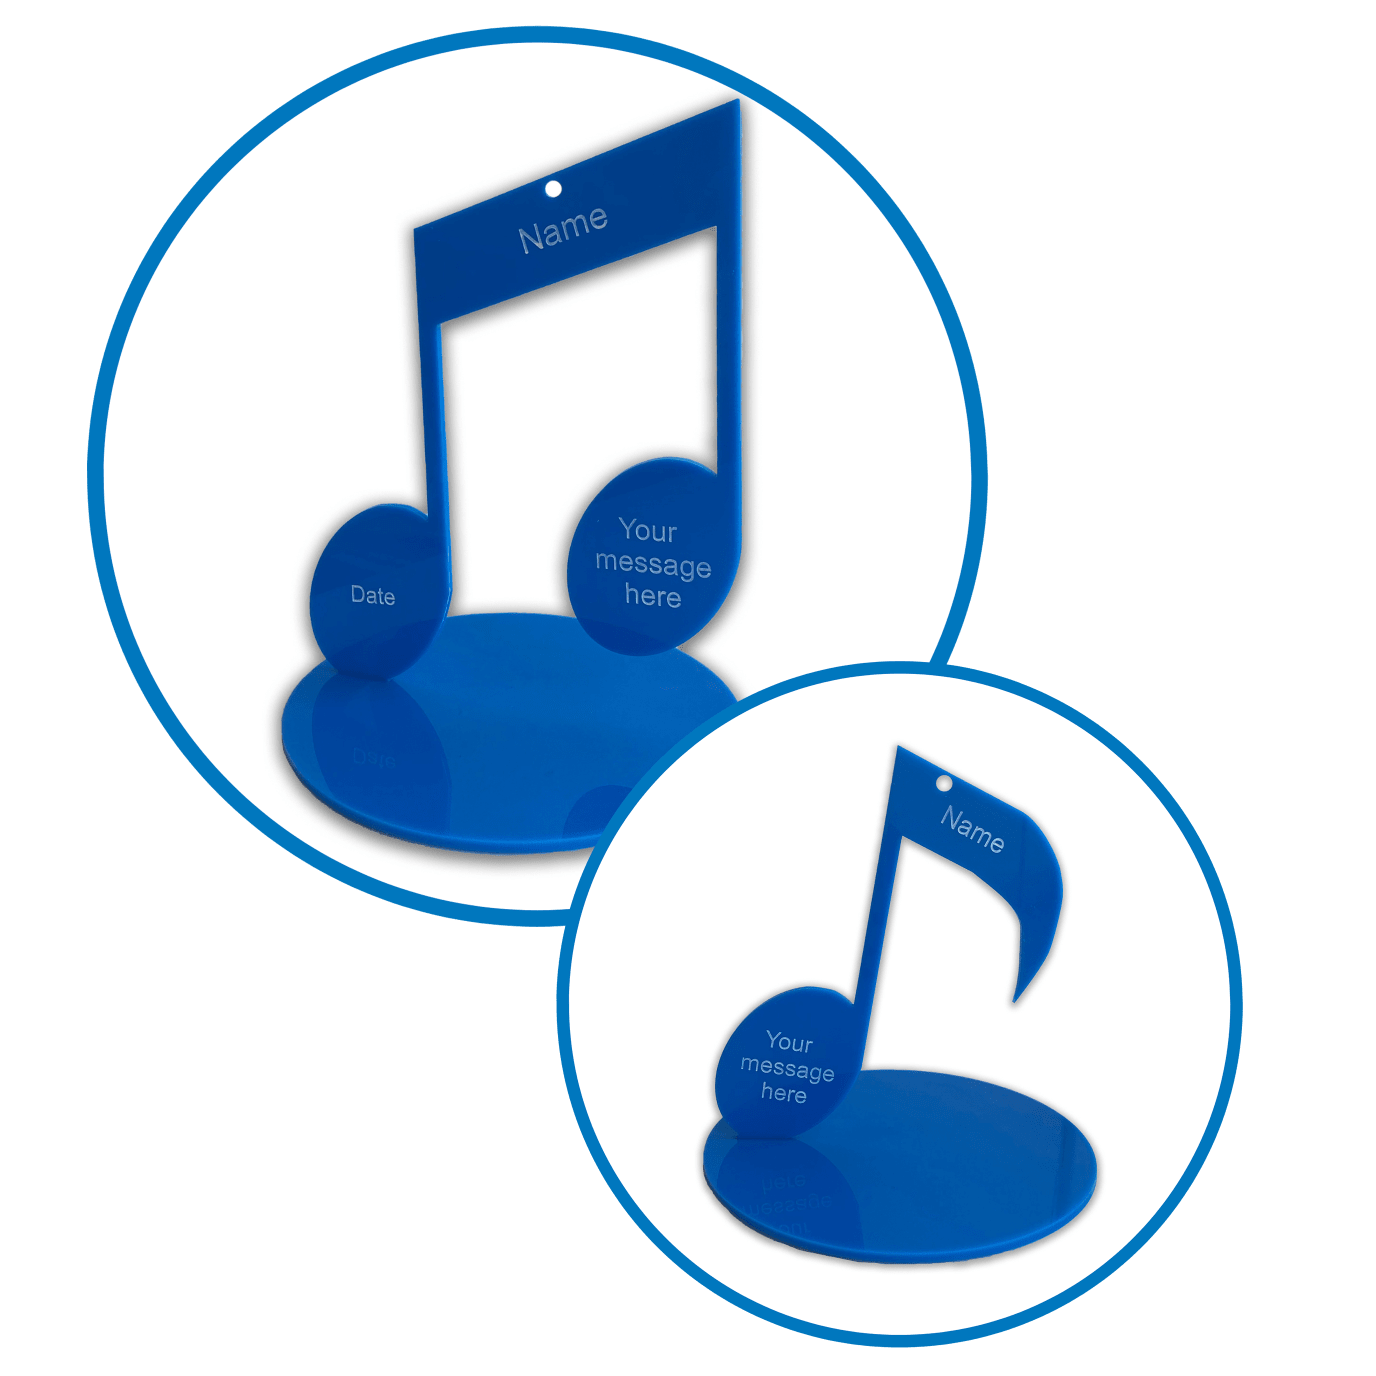 Musical Notes Single Note and Double Note Inside A Blue Circle